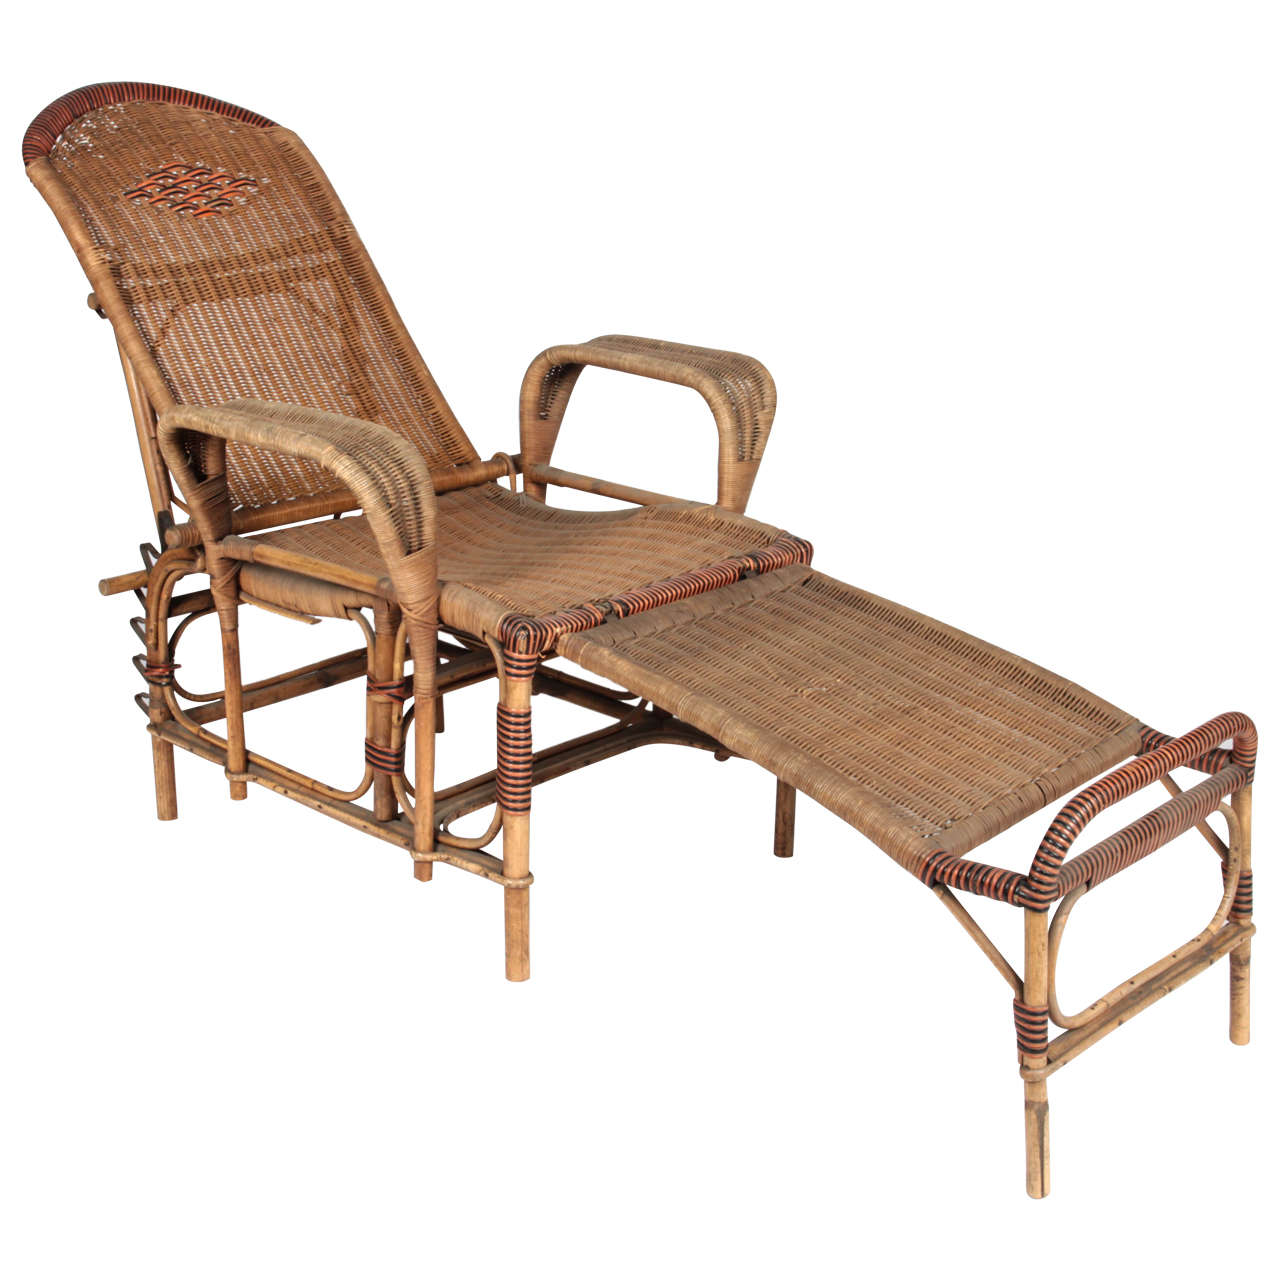 Art Deco Reclining Wicker Lounge Chair with Detachable Foot Rest